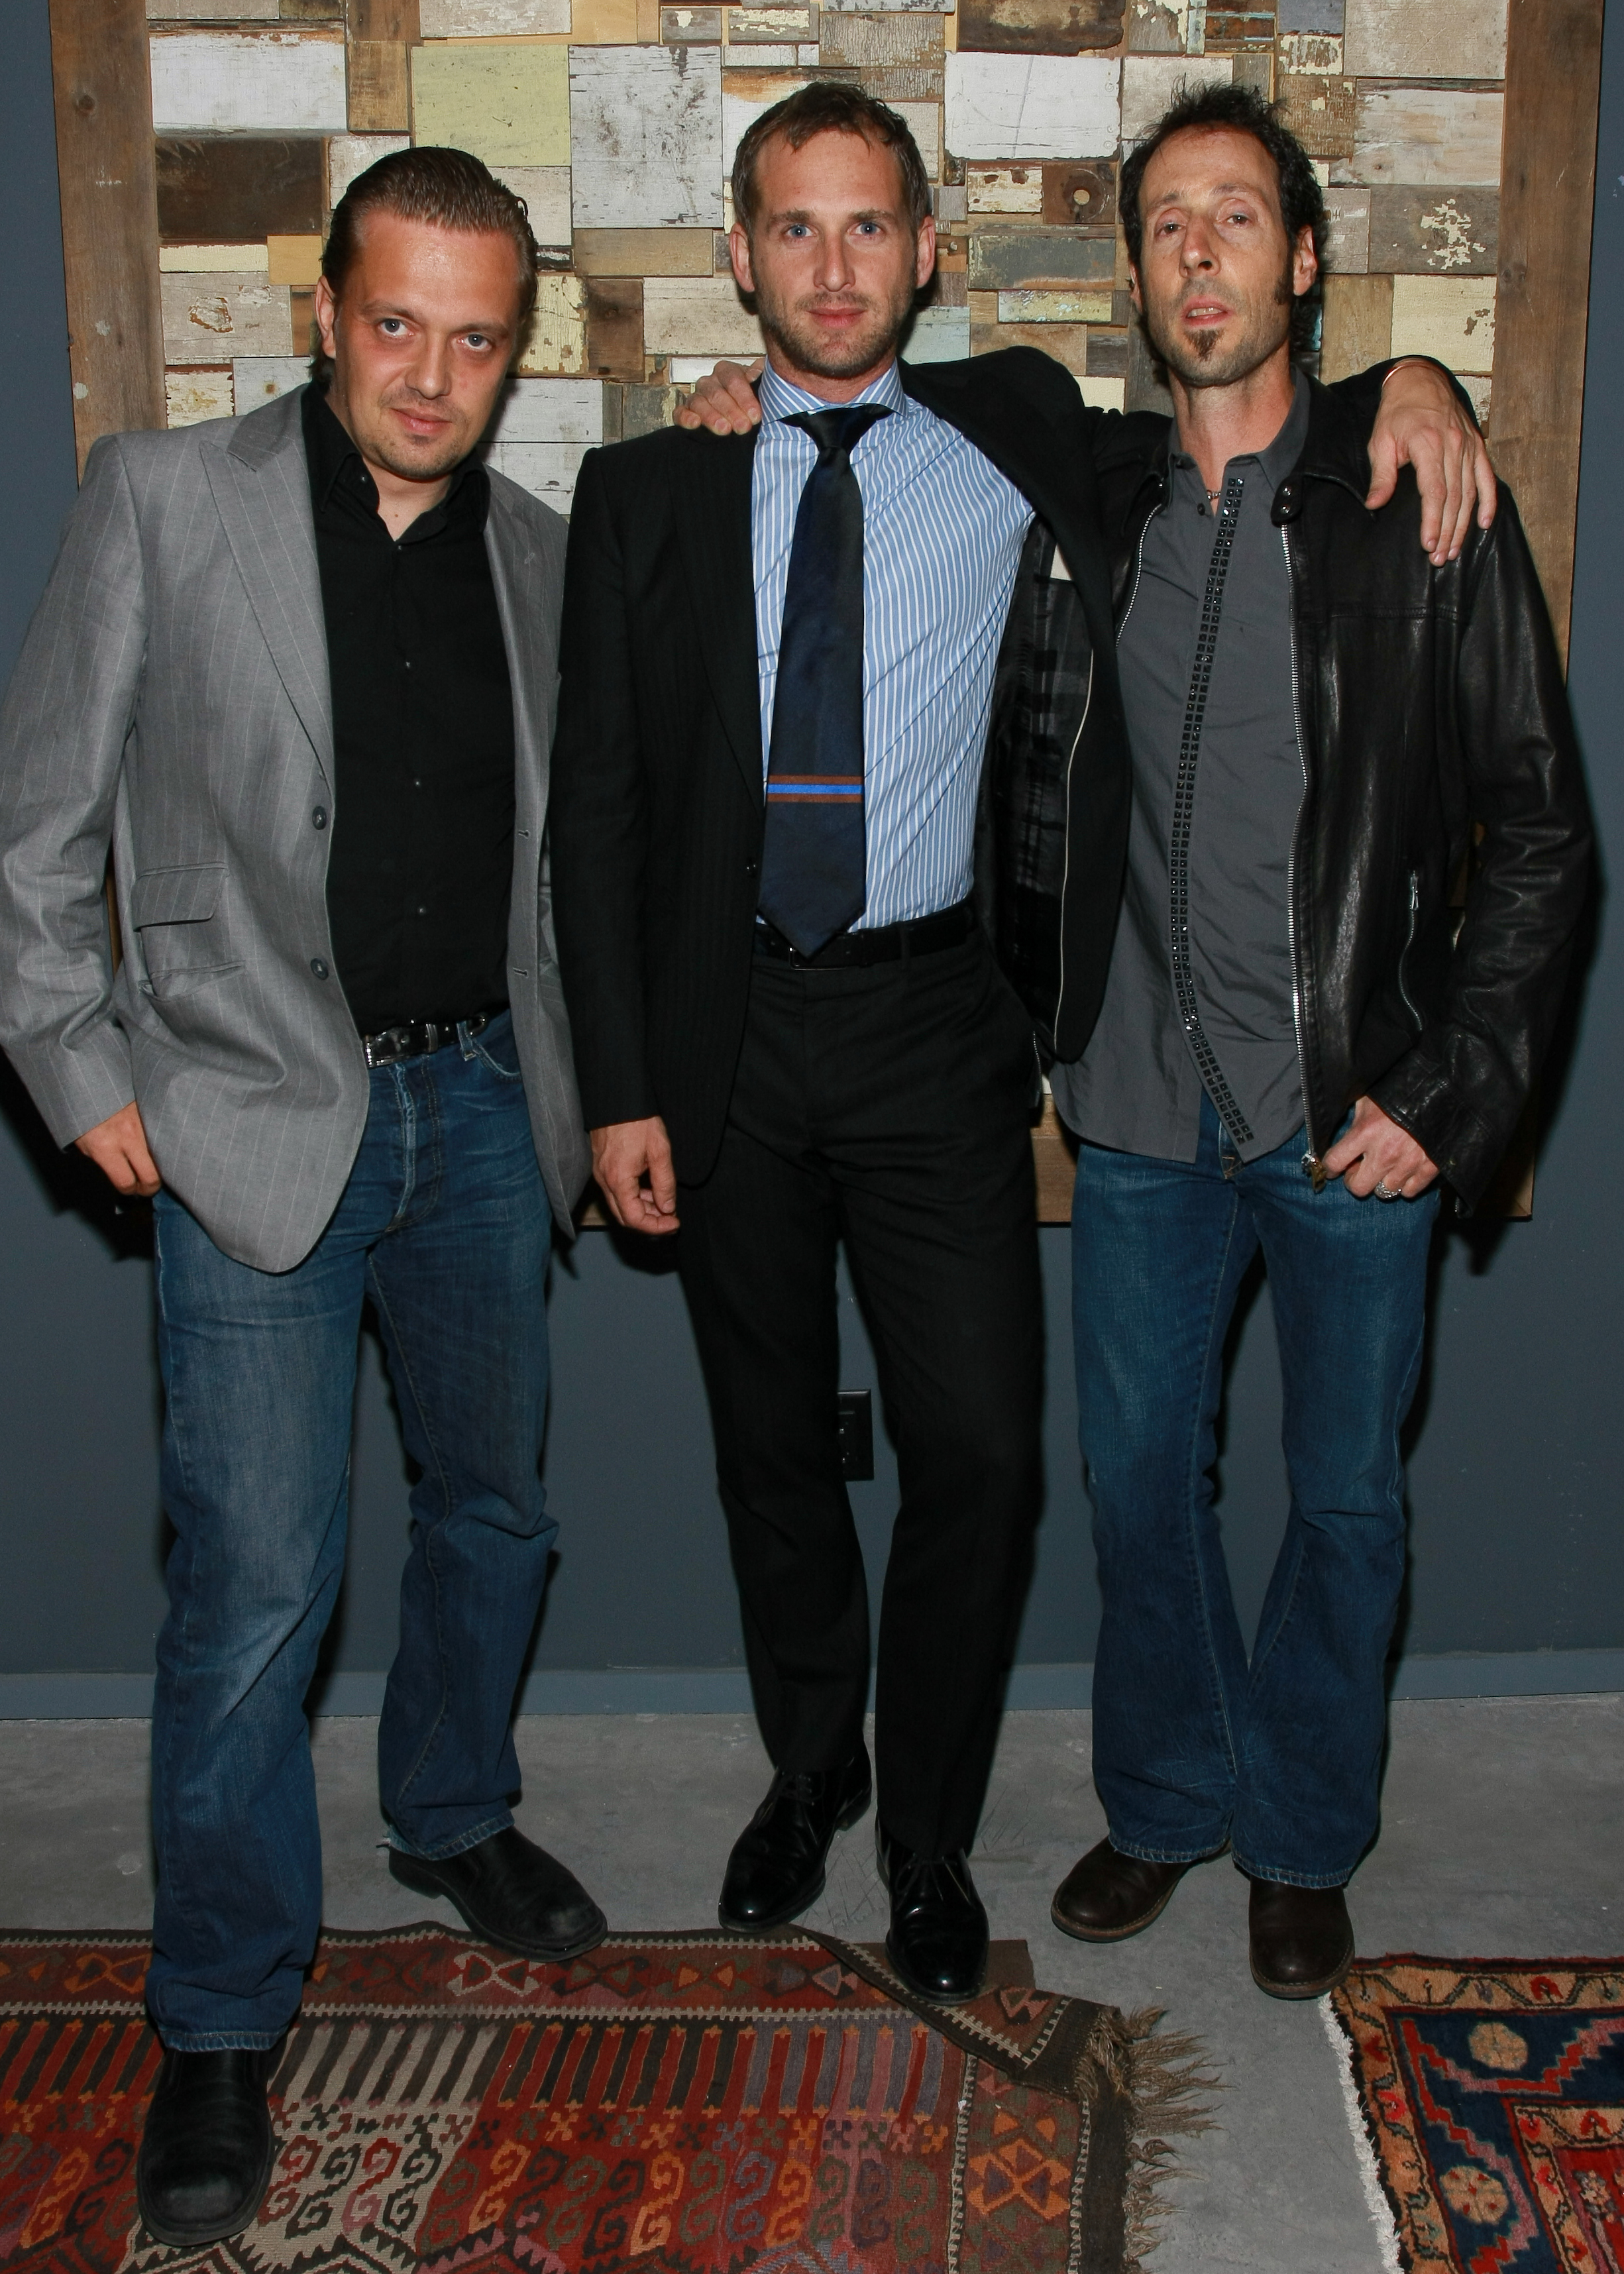 Steve Wiig, Josh Lucas and Martin Shore at the 